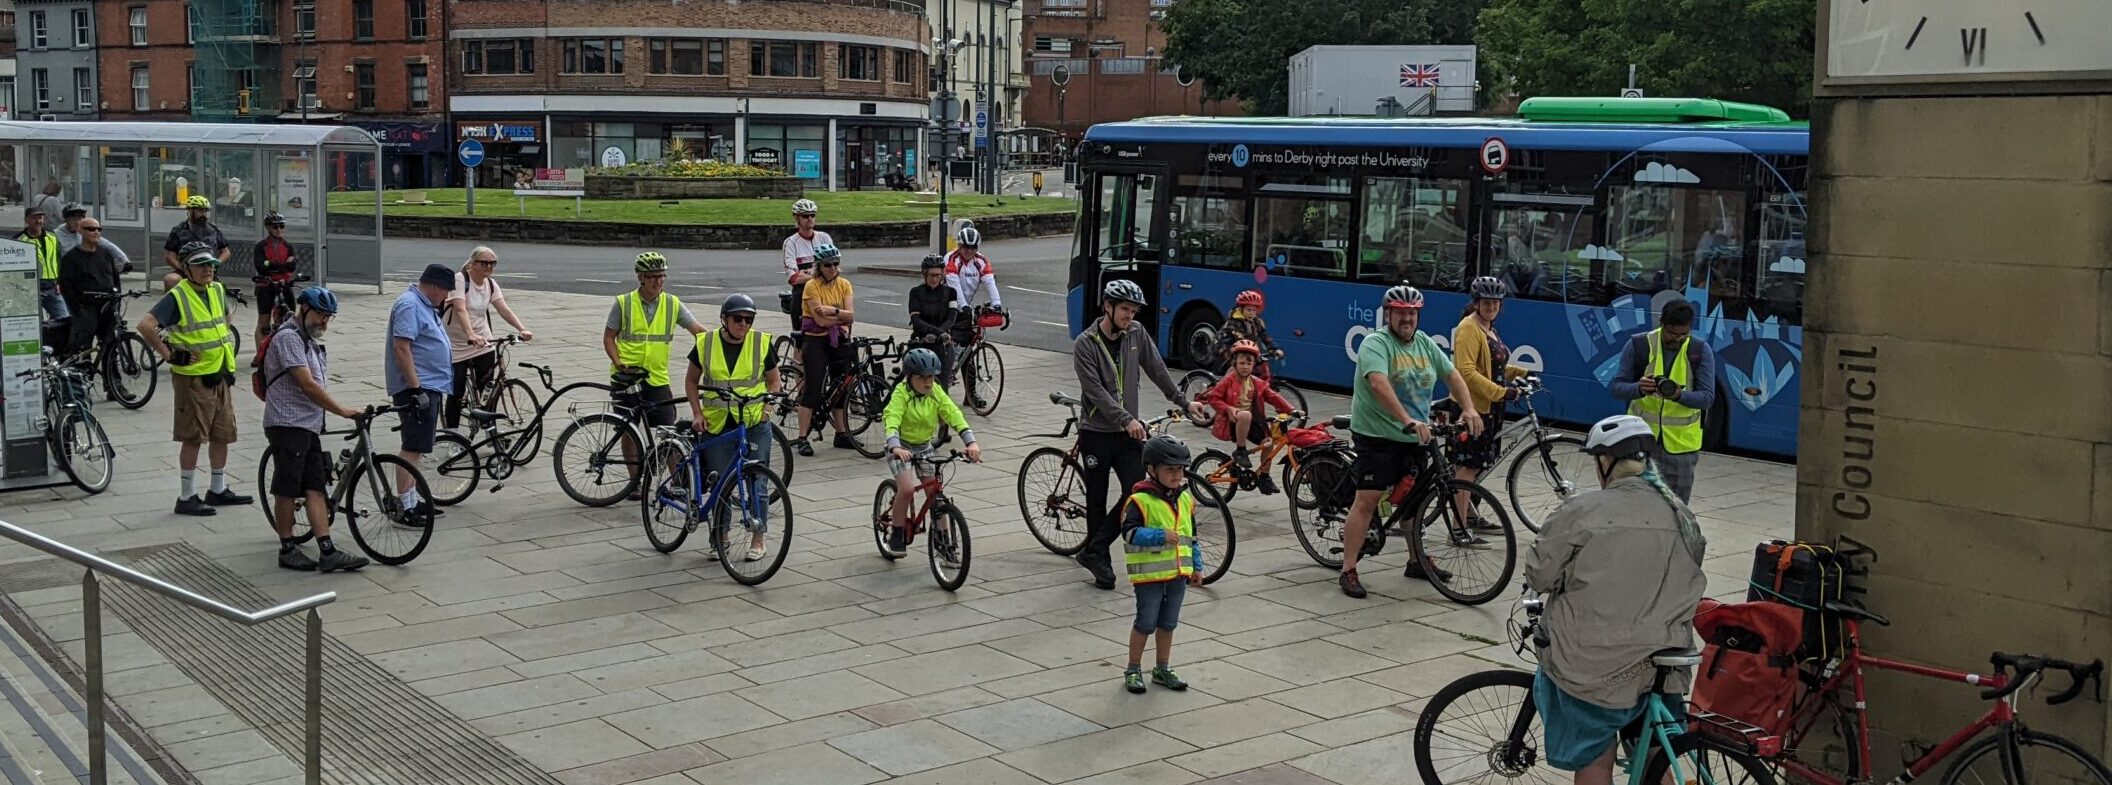 Photo: people with bicycles standing on a pavement. Behind them is a roundabout and a bus.